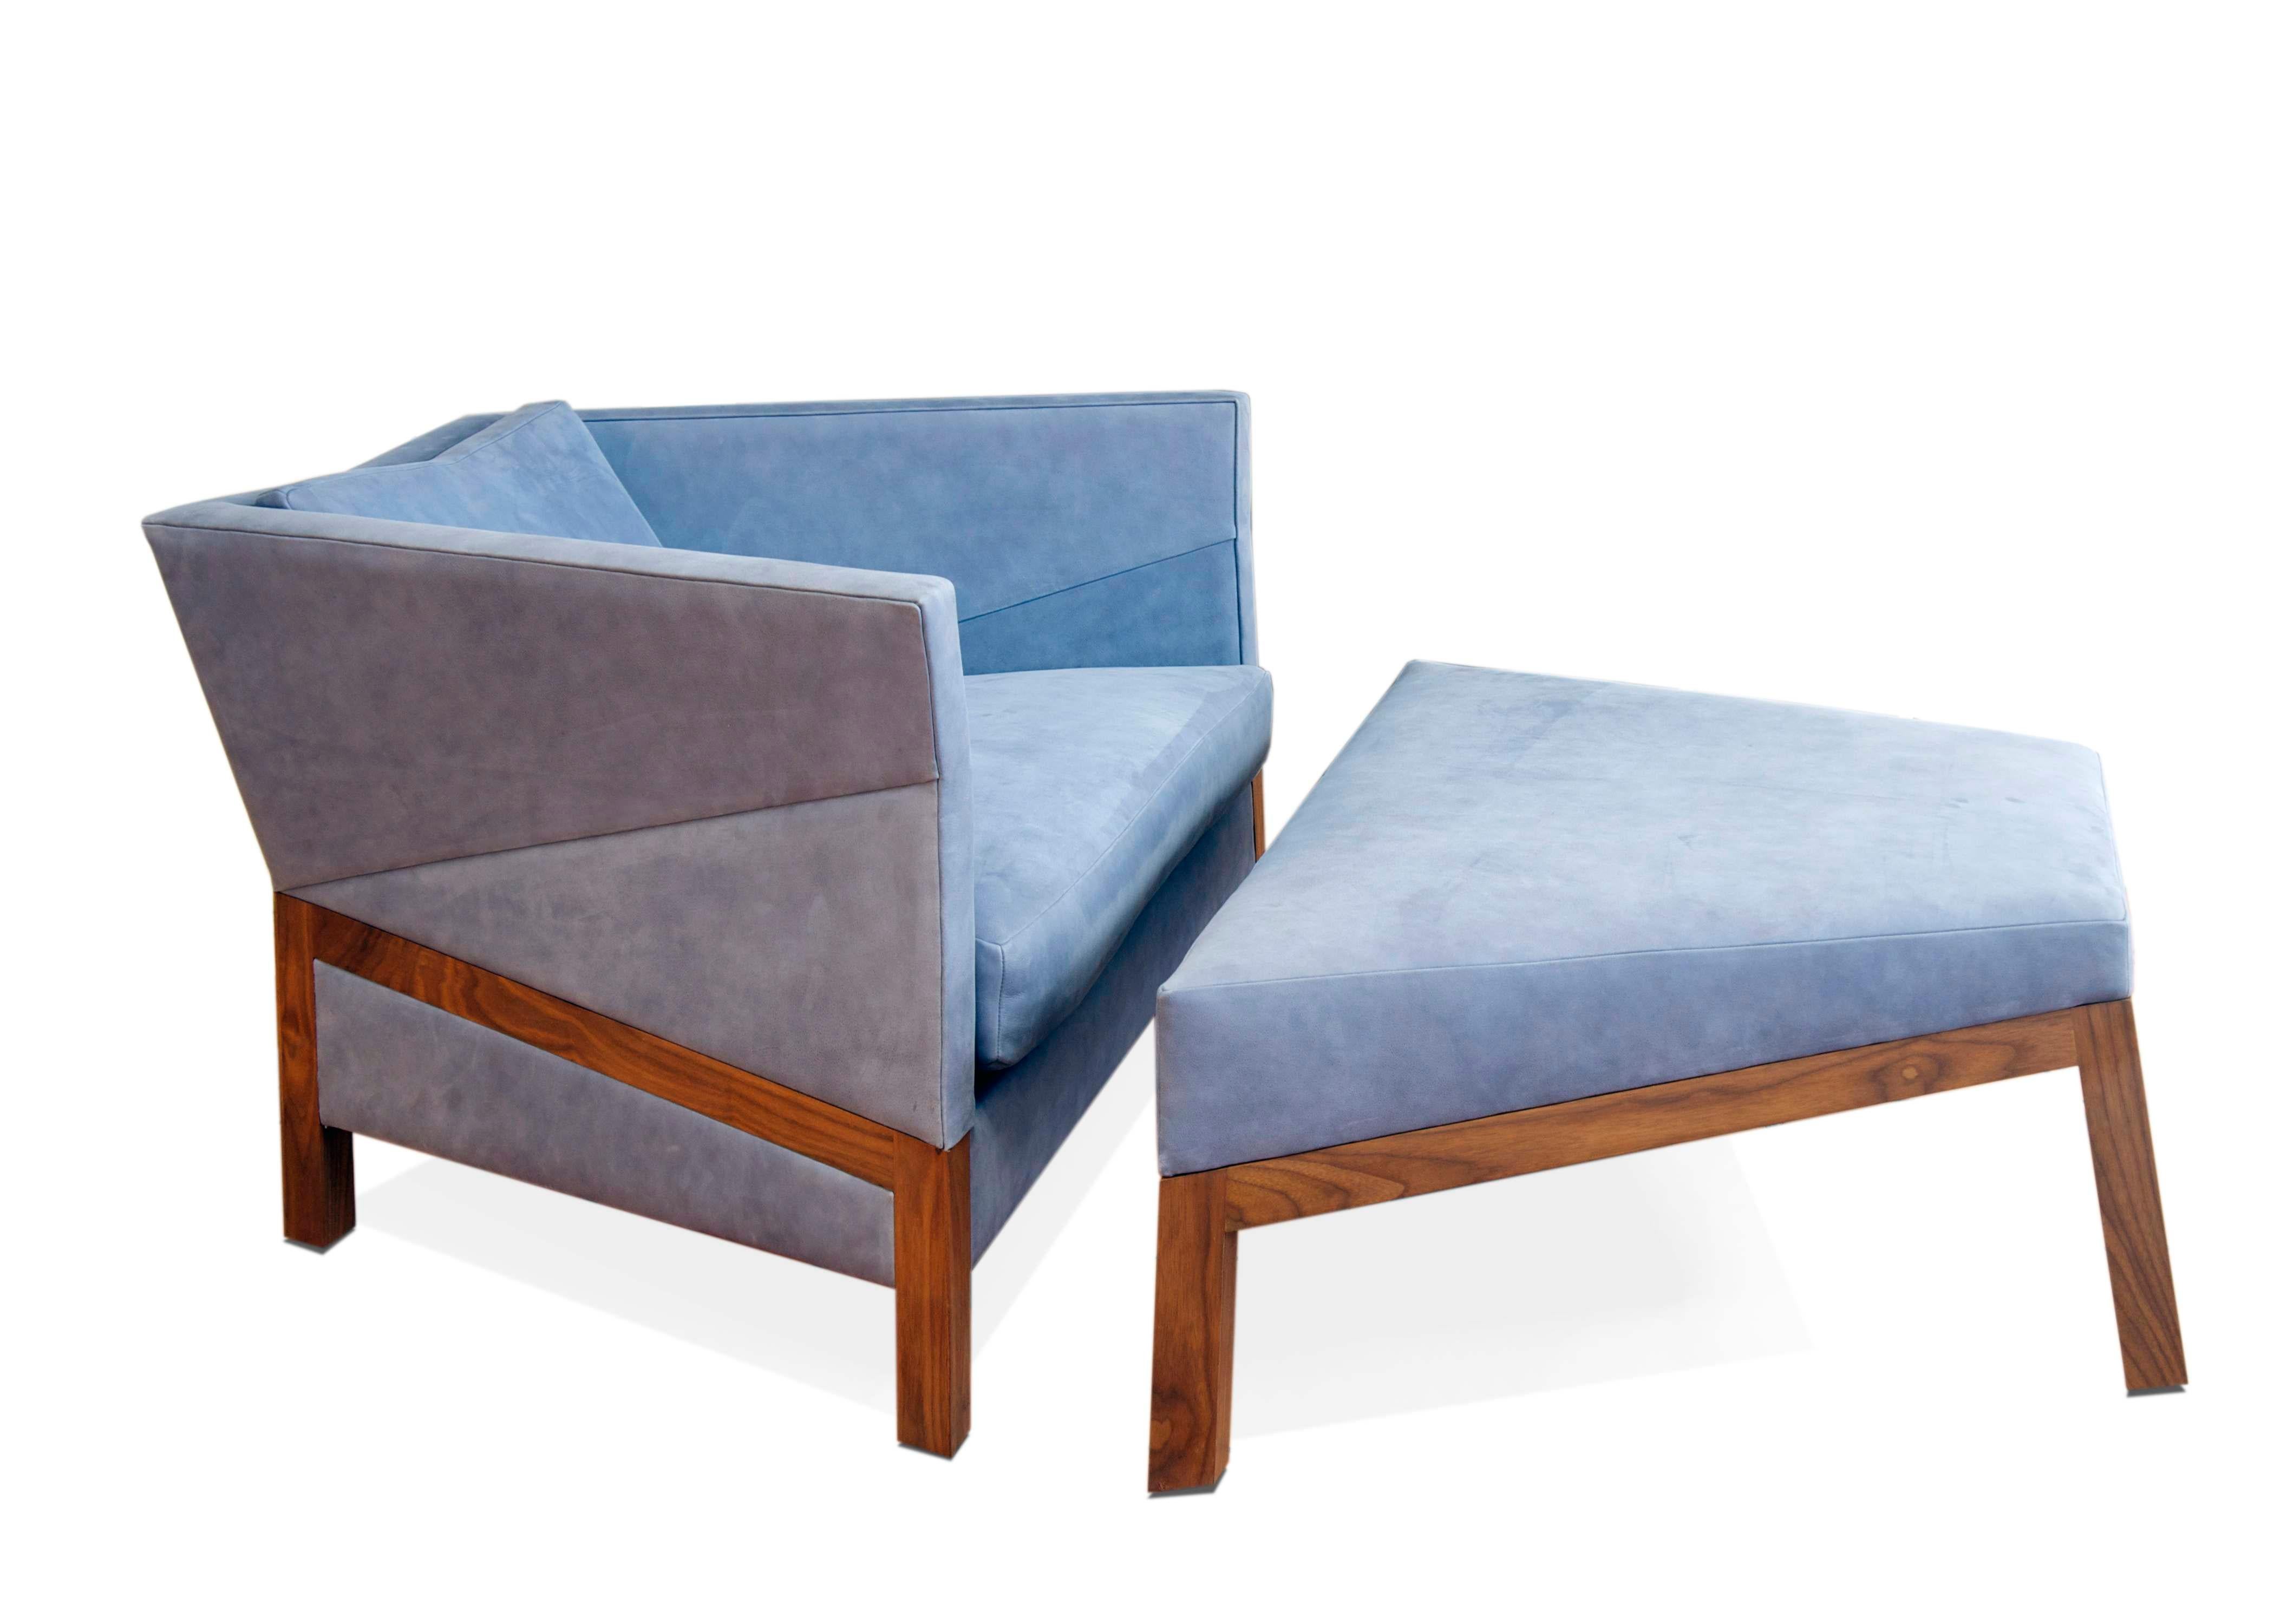 The Bias collection, is a distinctive collection of sofa, lounge chair, ottomans, side tables, hooded, high-back chairs and beds inspired by crystalline structures with bias cut hand paneled upholstery and attractive exposed wooden frames, this